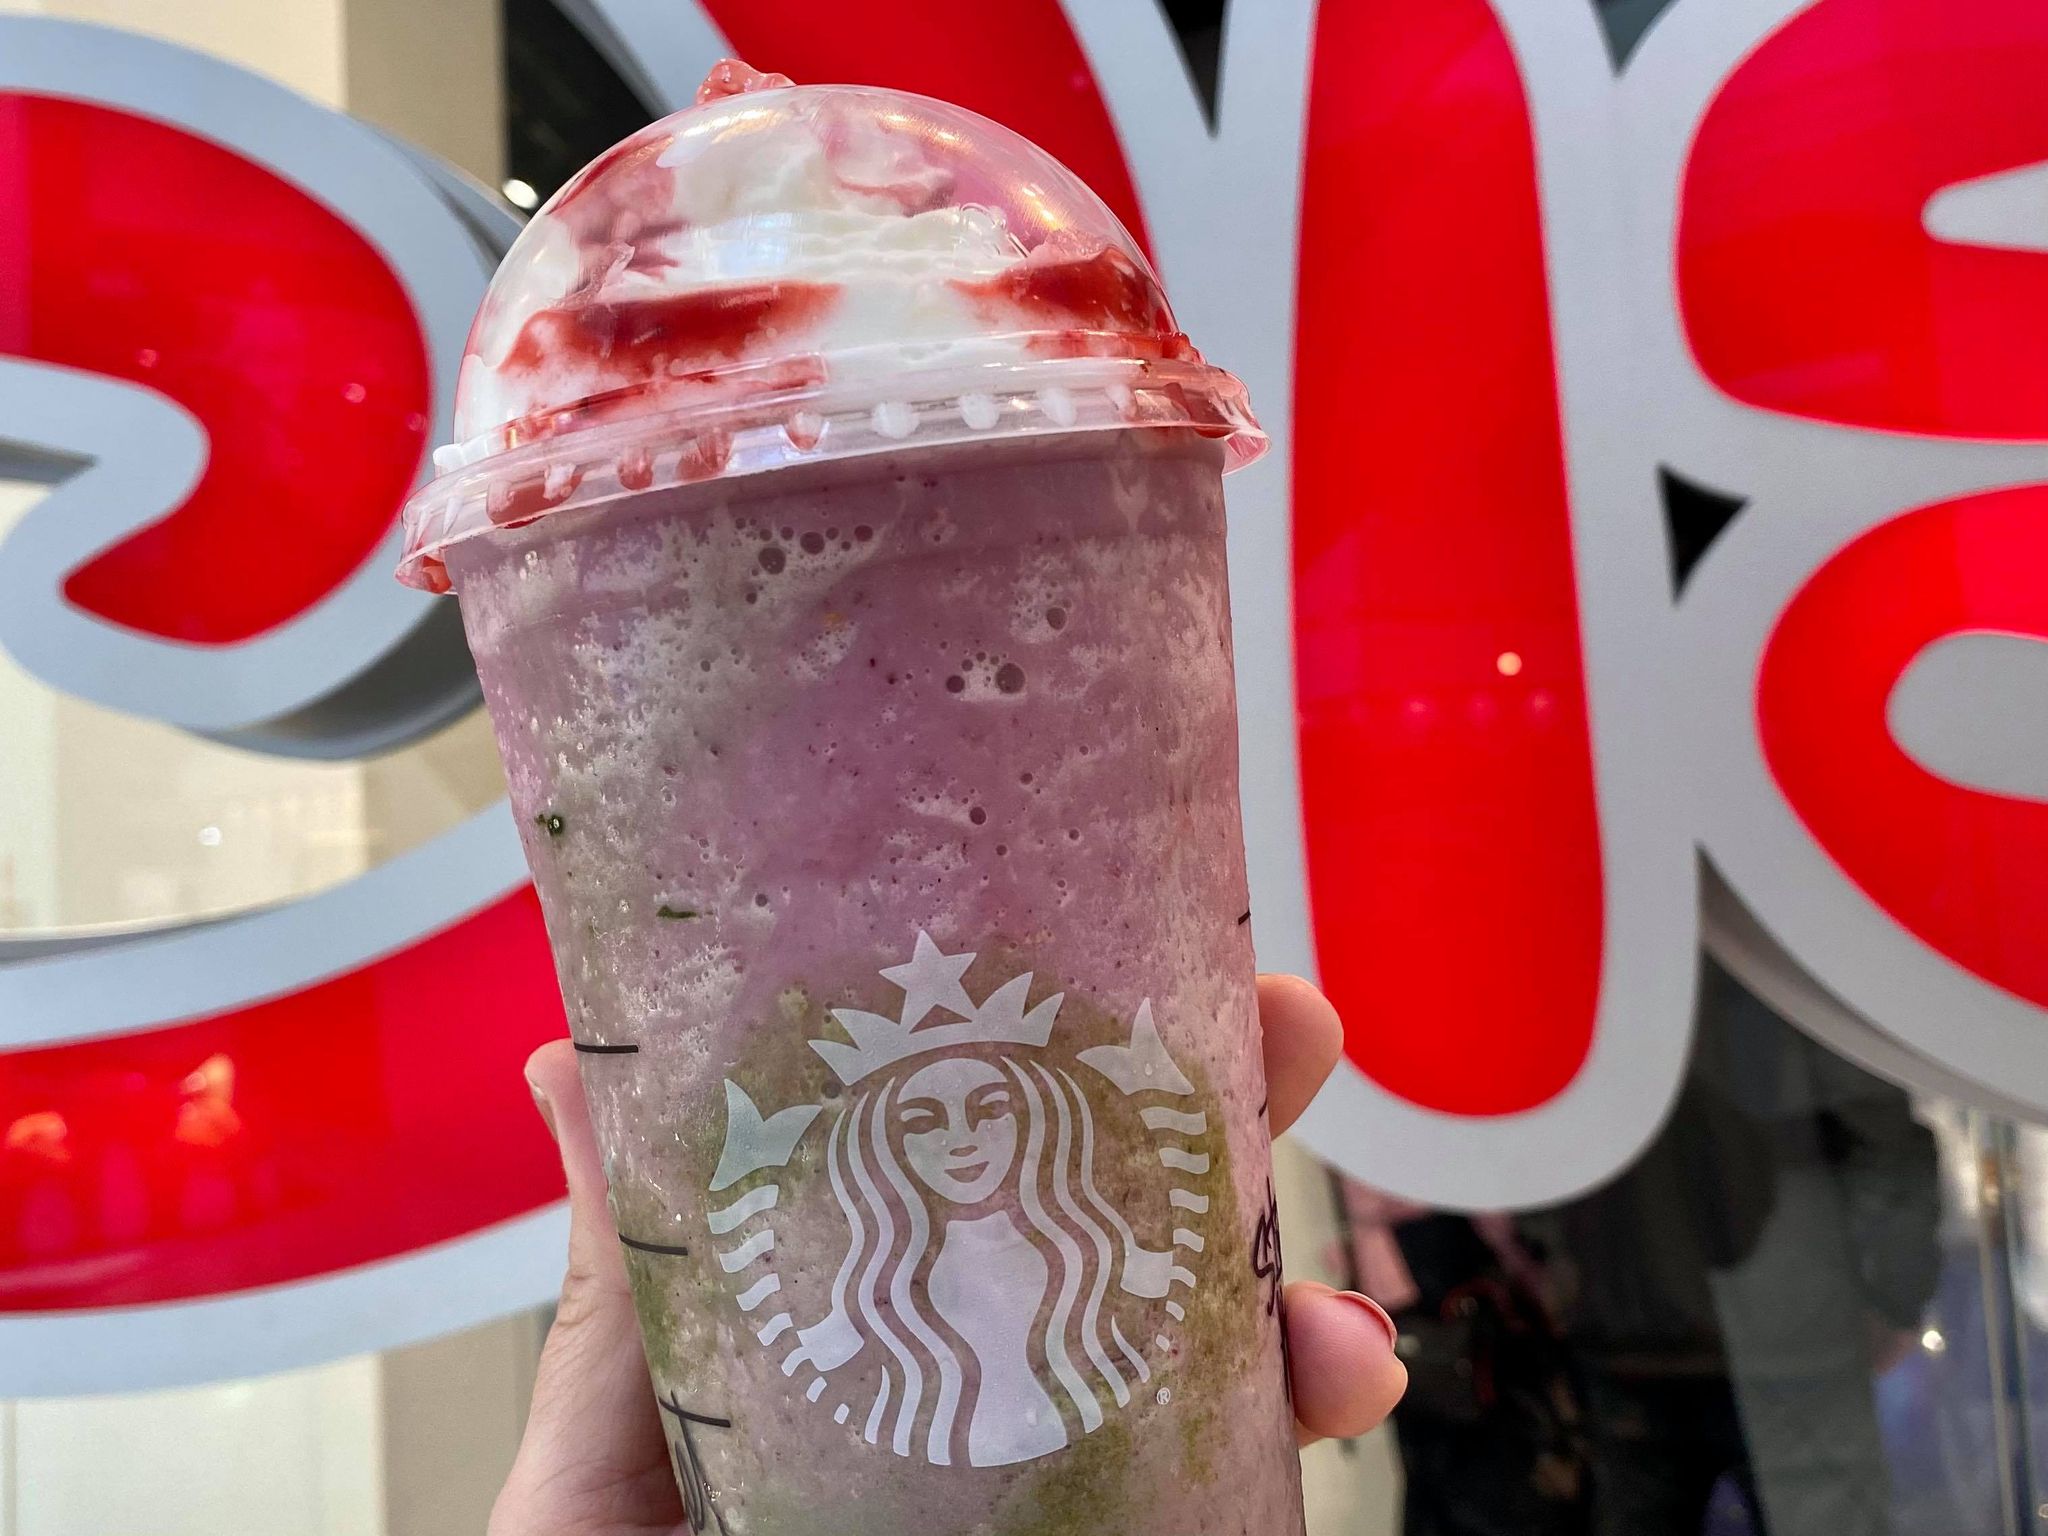 We're Flipping Our Fins For This Ariel Inspired Frappuccino From Starbucks